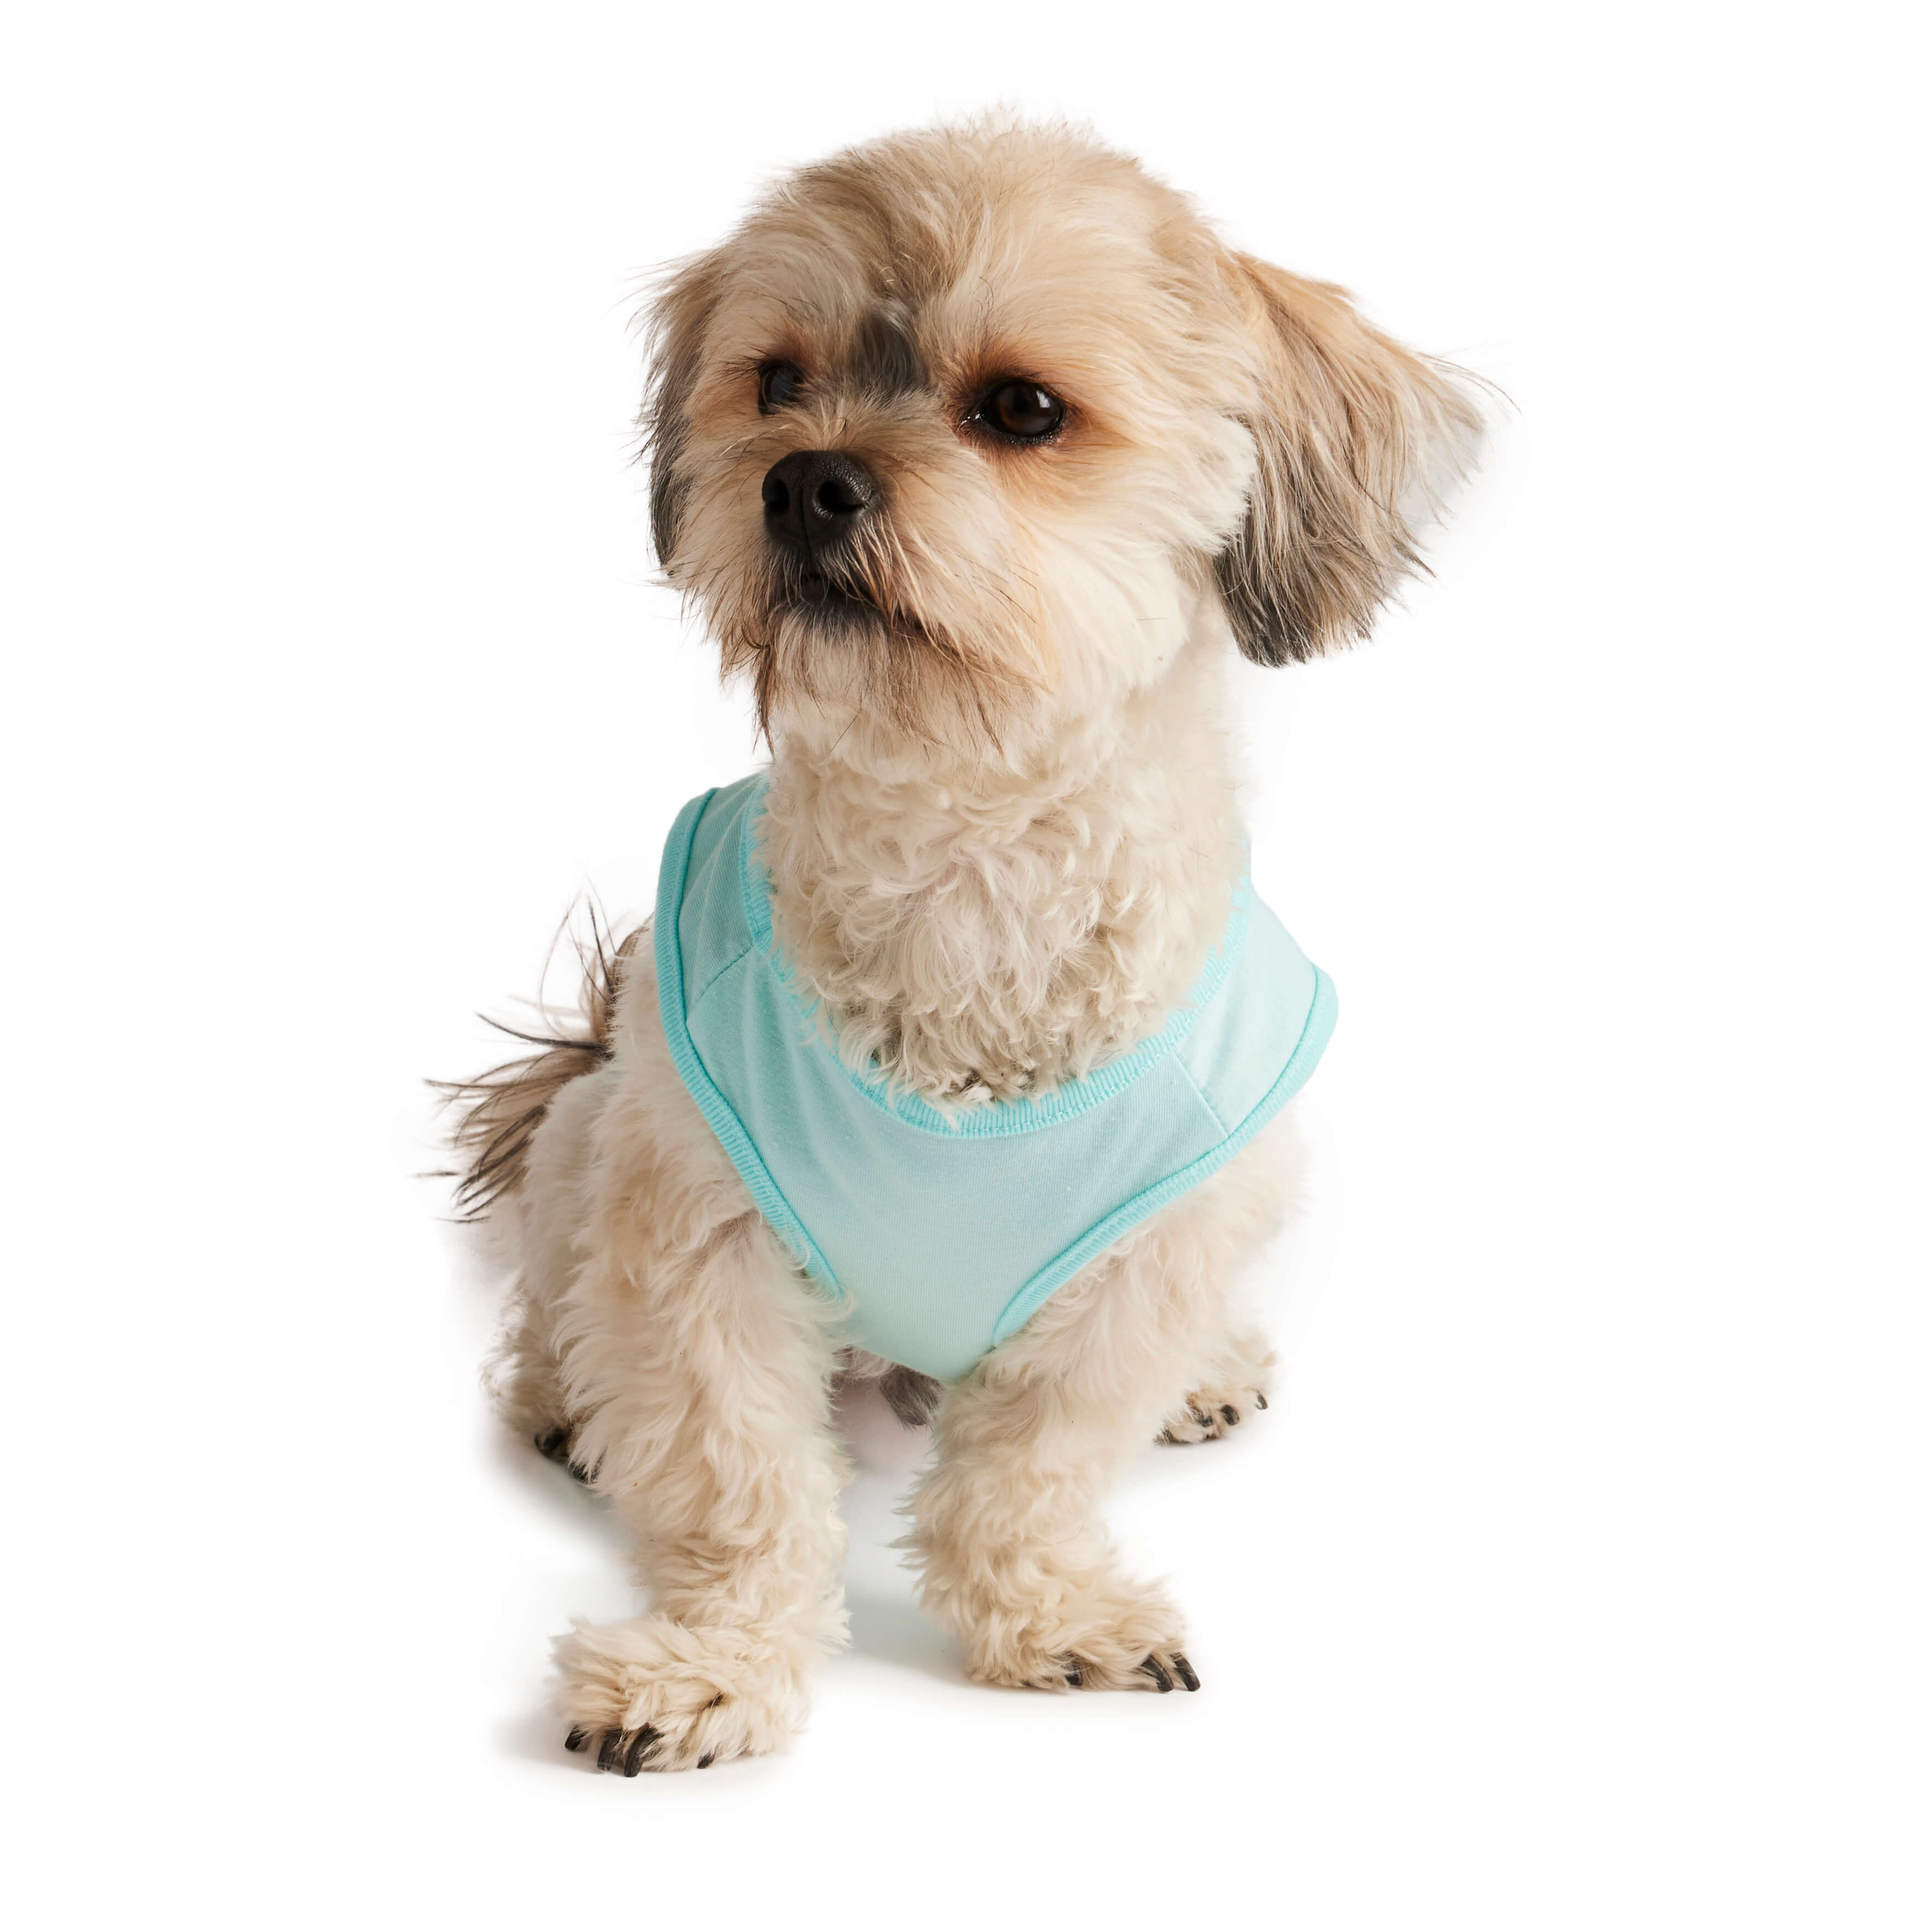 hotel doggy thread collective dog tank top birthday pup blue